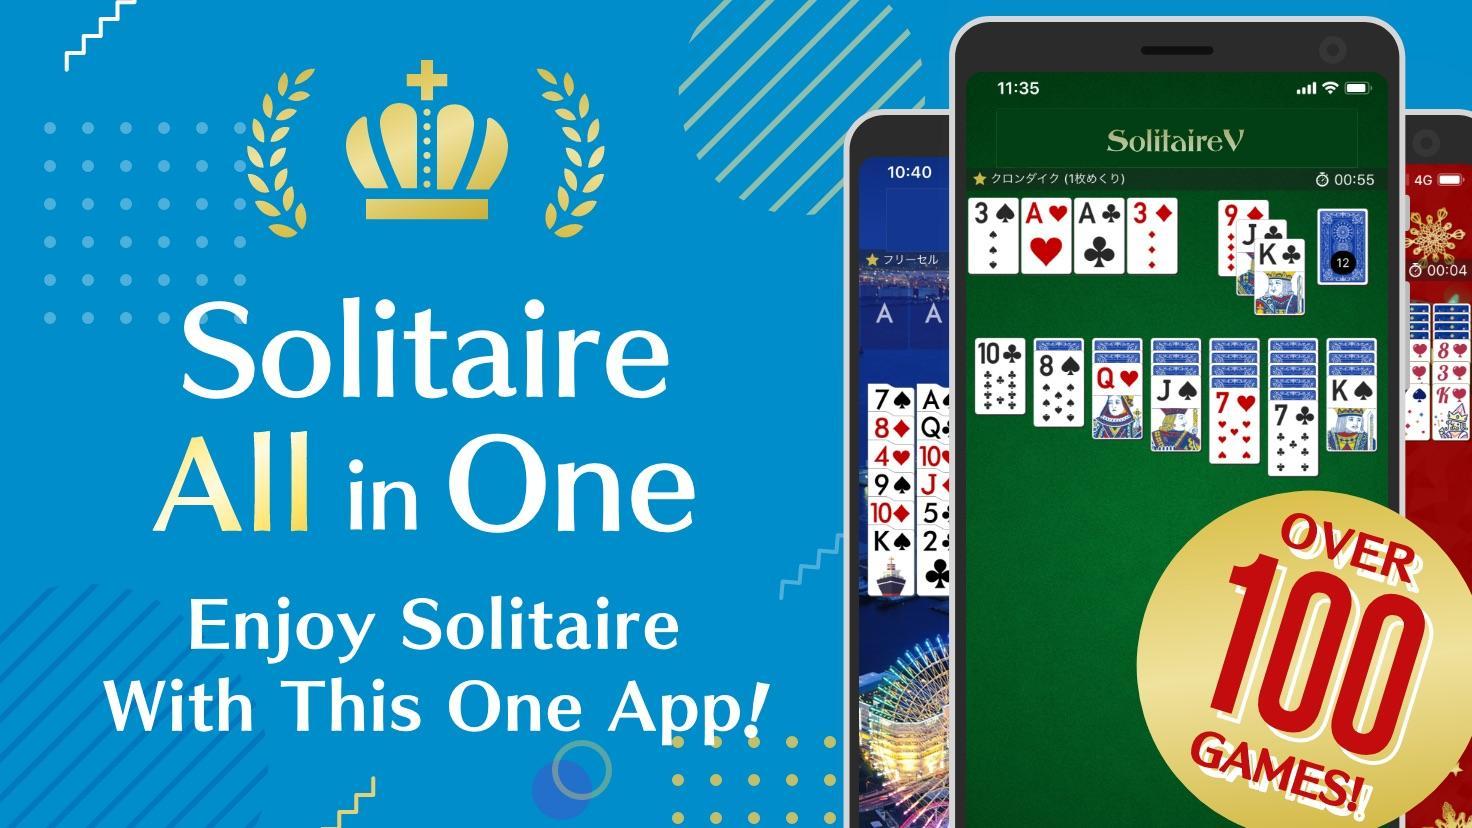 Solitaire Victory - 2020 Solitaire Collection 100 8.3.2 Screenshot 8